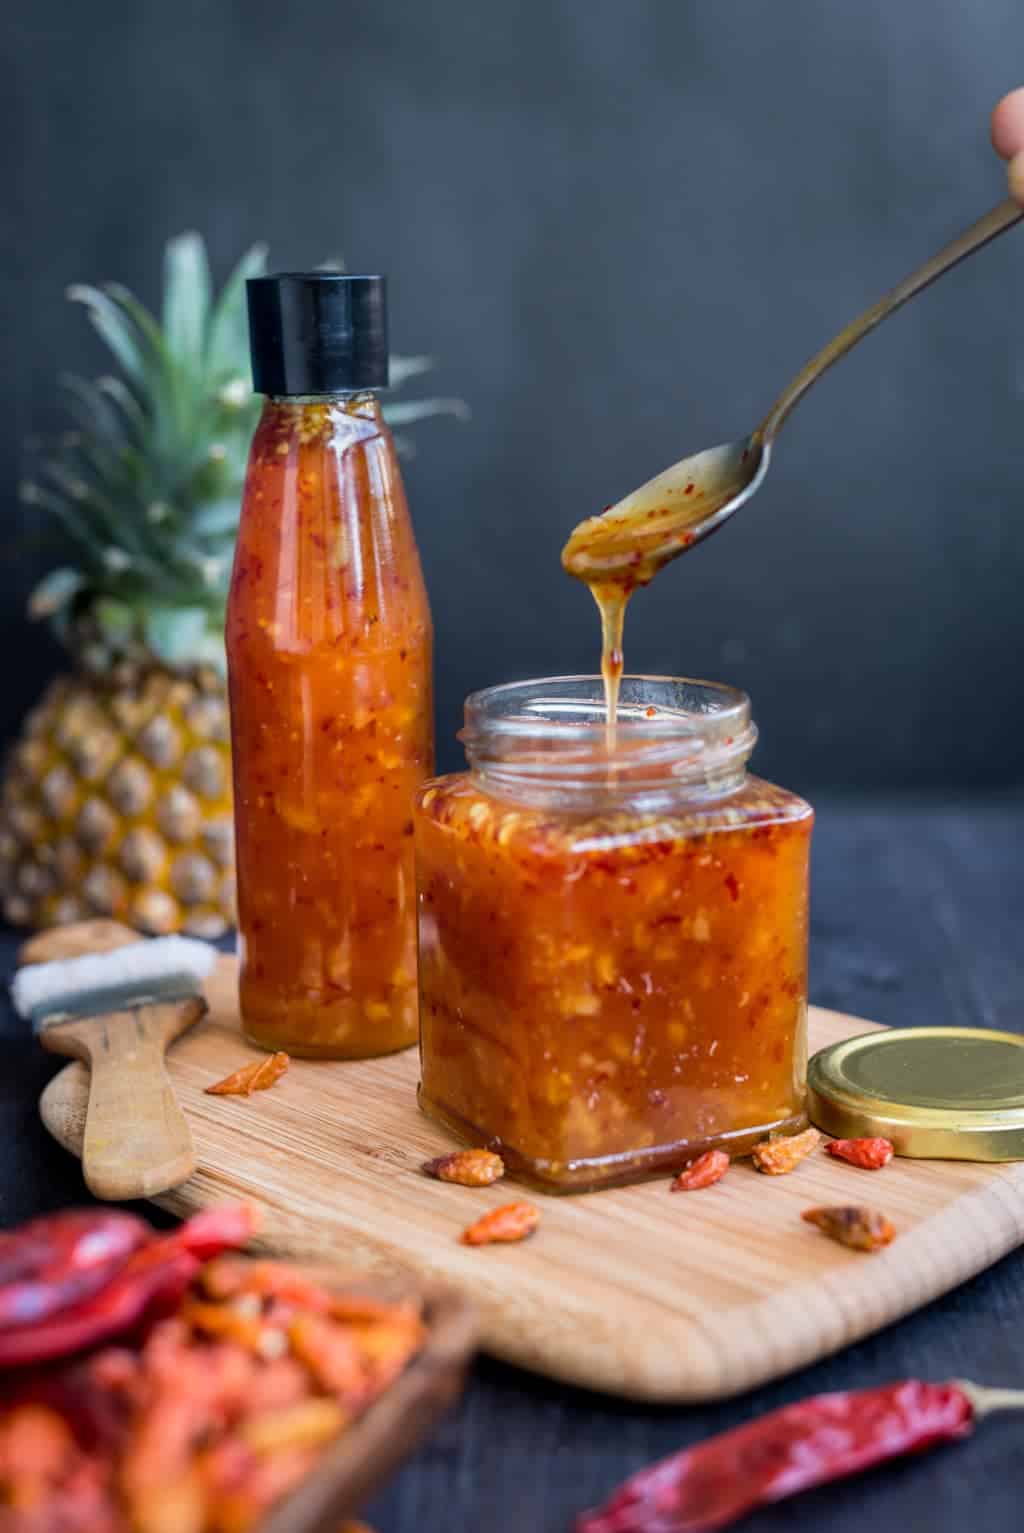 Spoonful of sweet and hot pineapple sauce filling up a jar.